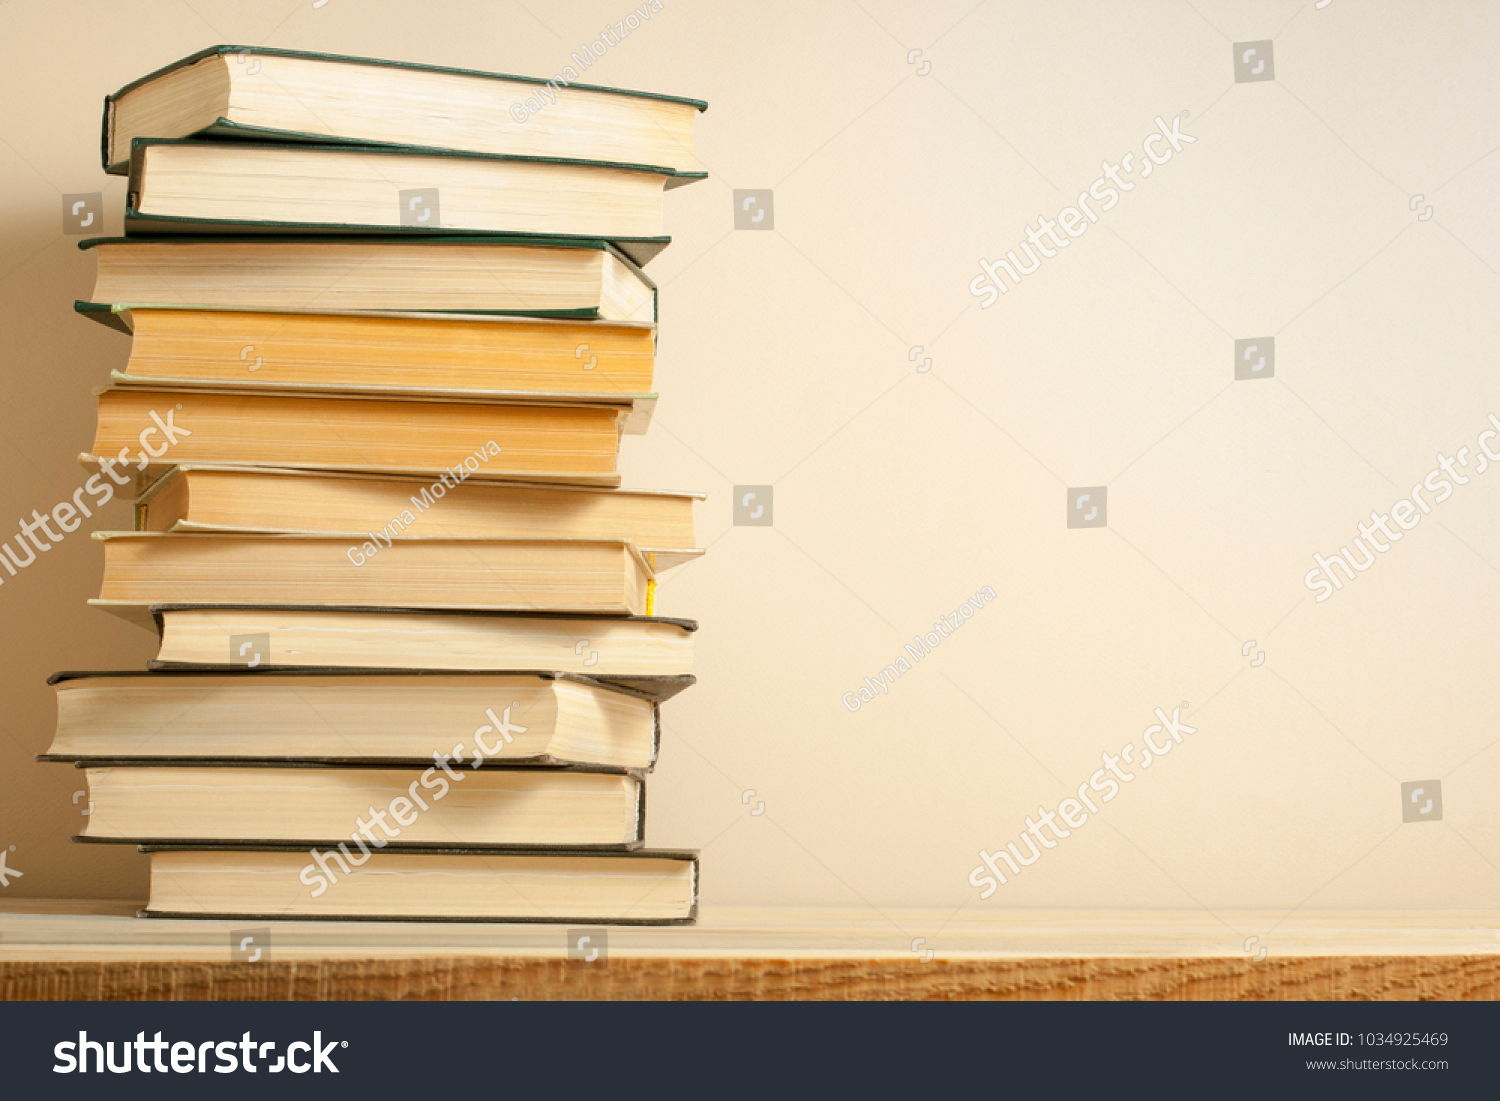 Stack of books on the wooden table. Education background.Back to school. Copy space for text. #1034925469